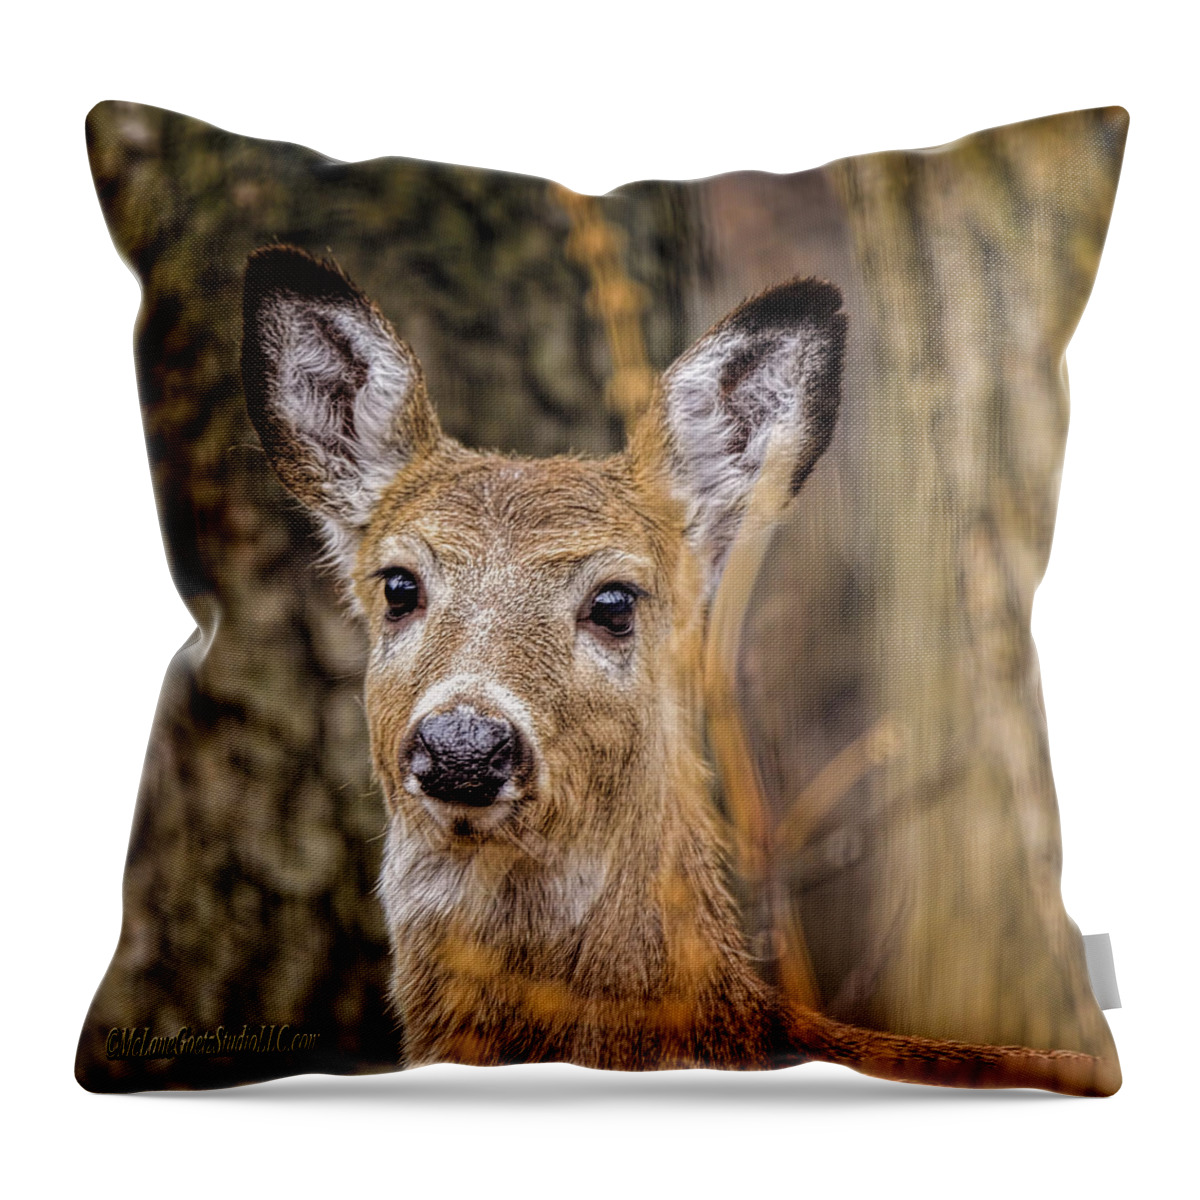 White-tailed Throw Pillow featuring the photograph White Tailed Doe Eyed Deer by LeeAnn McLaneGoetz McLaneGoetzStudioLLCcom